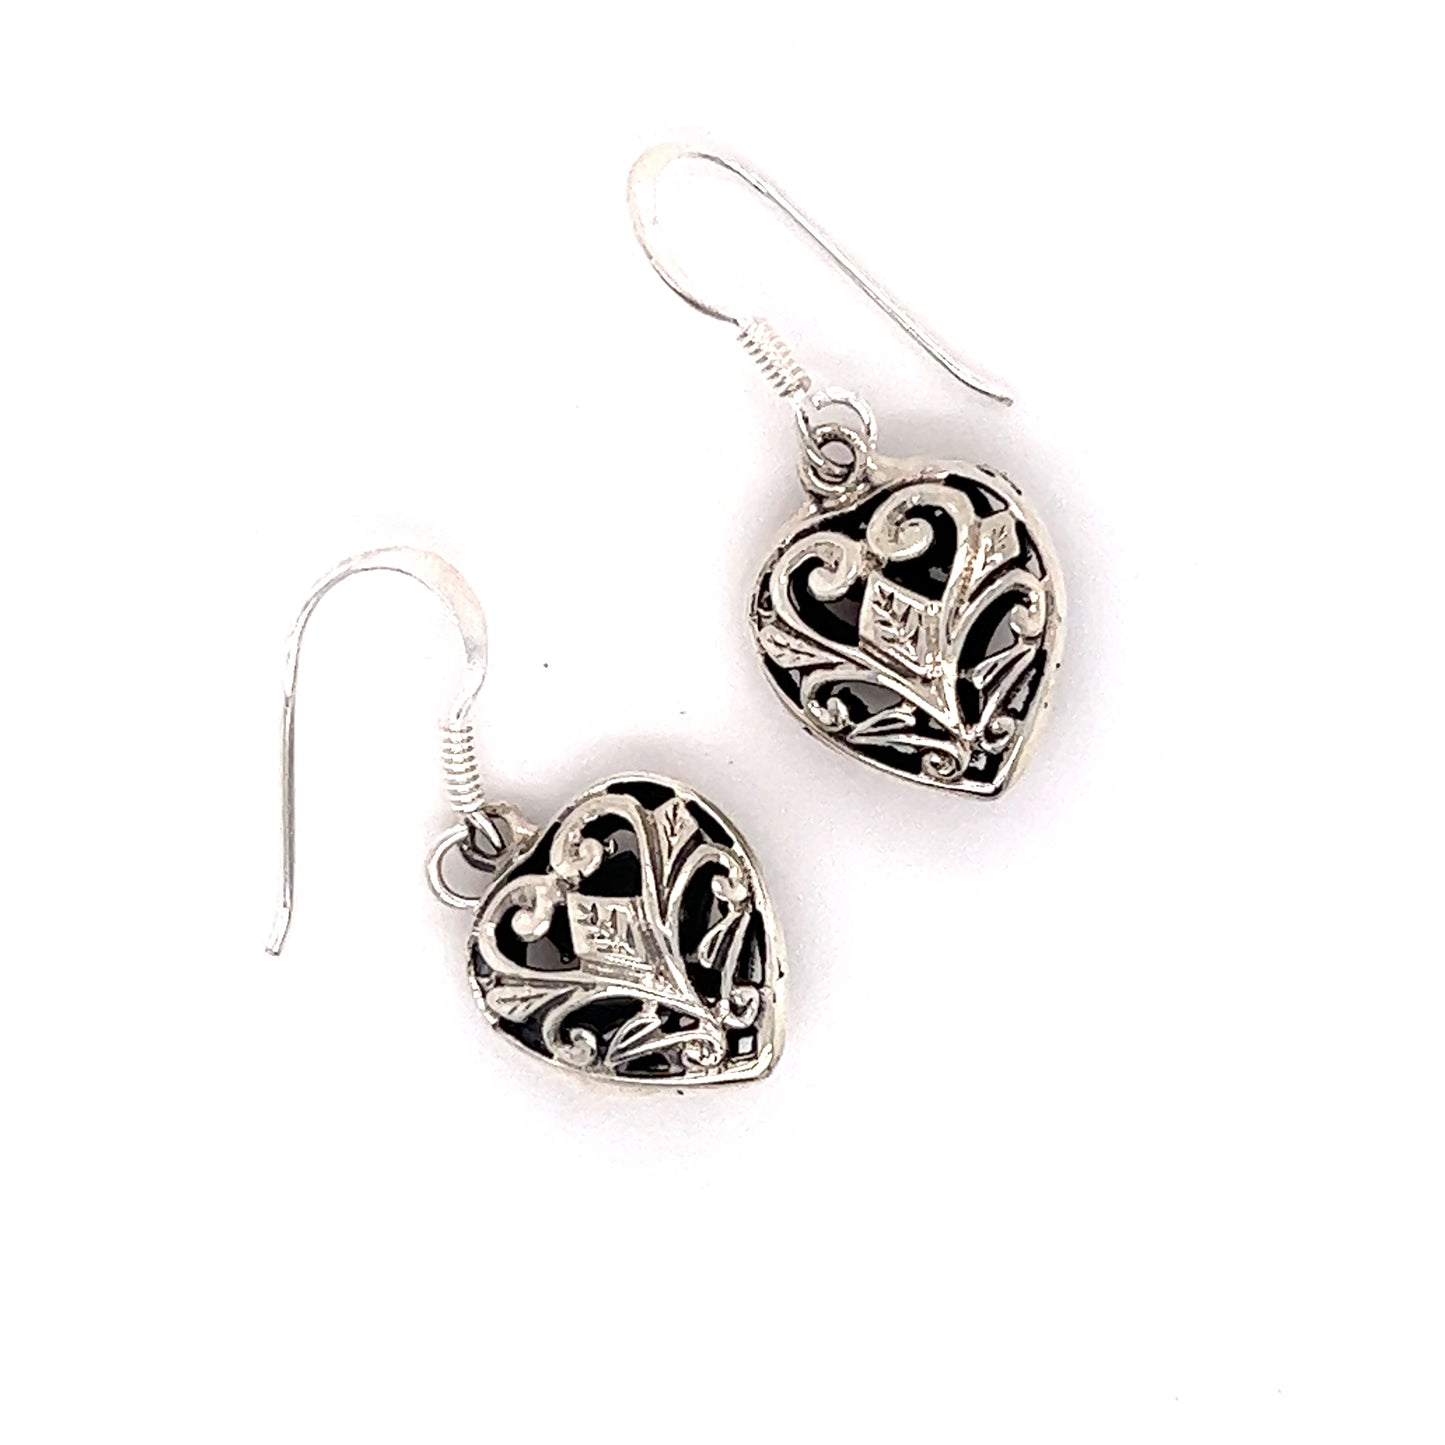 A pair of Timeless Filigree Heart Earrings by Super Silver, with a Victorian feel, showcased on a white background.